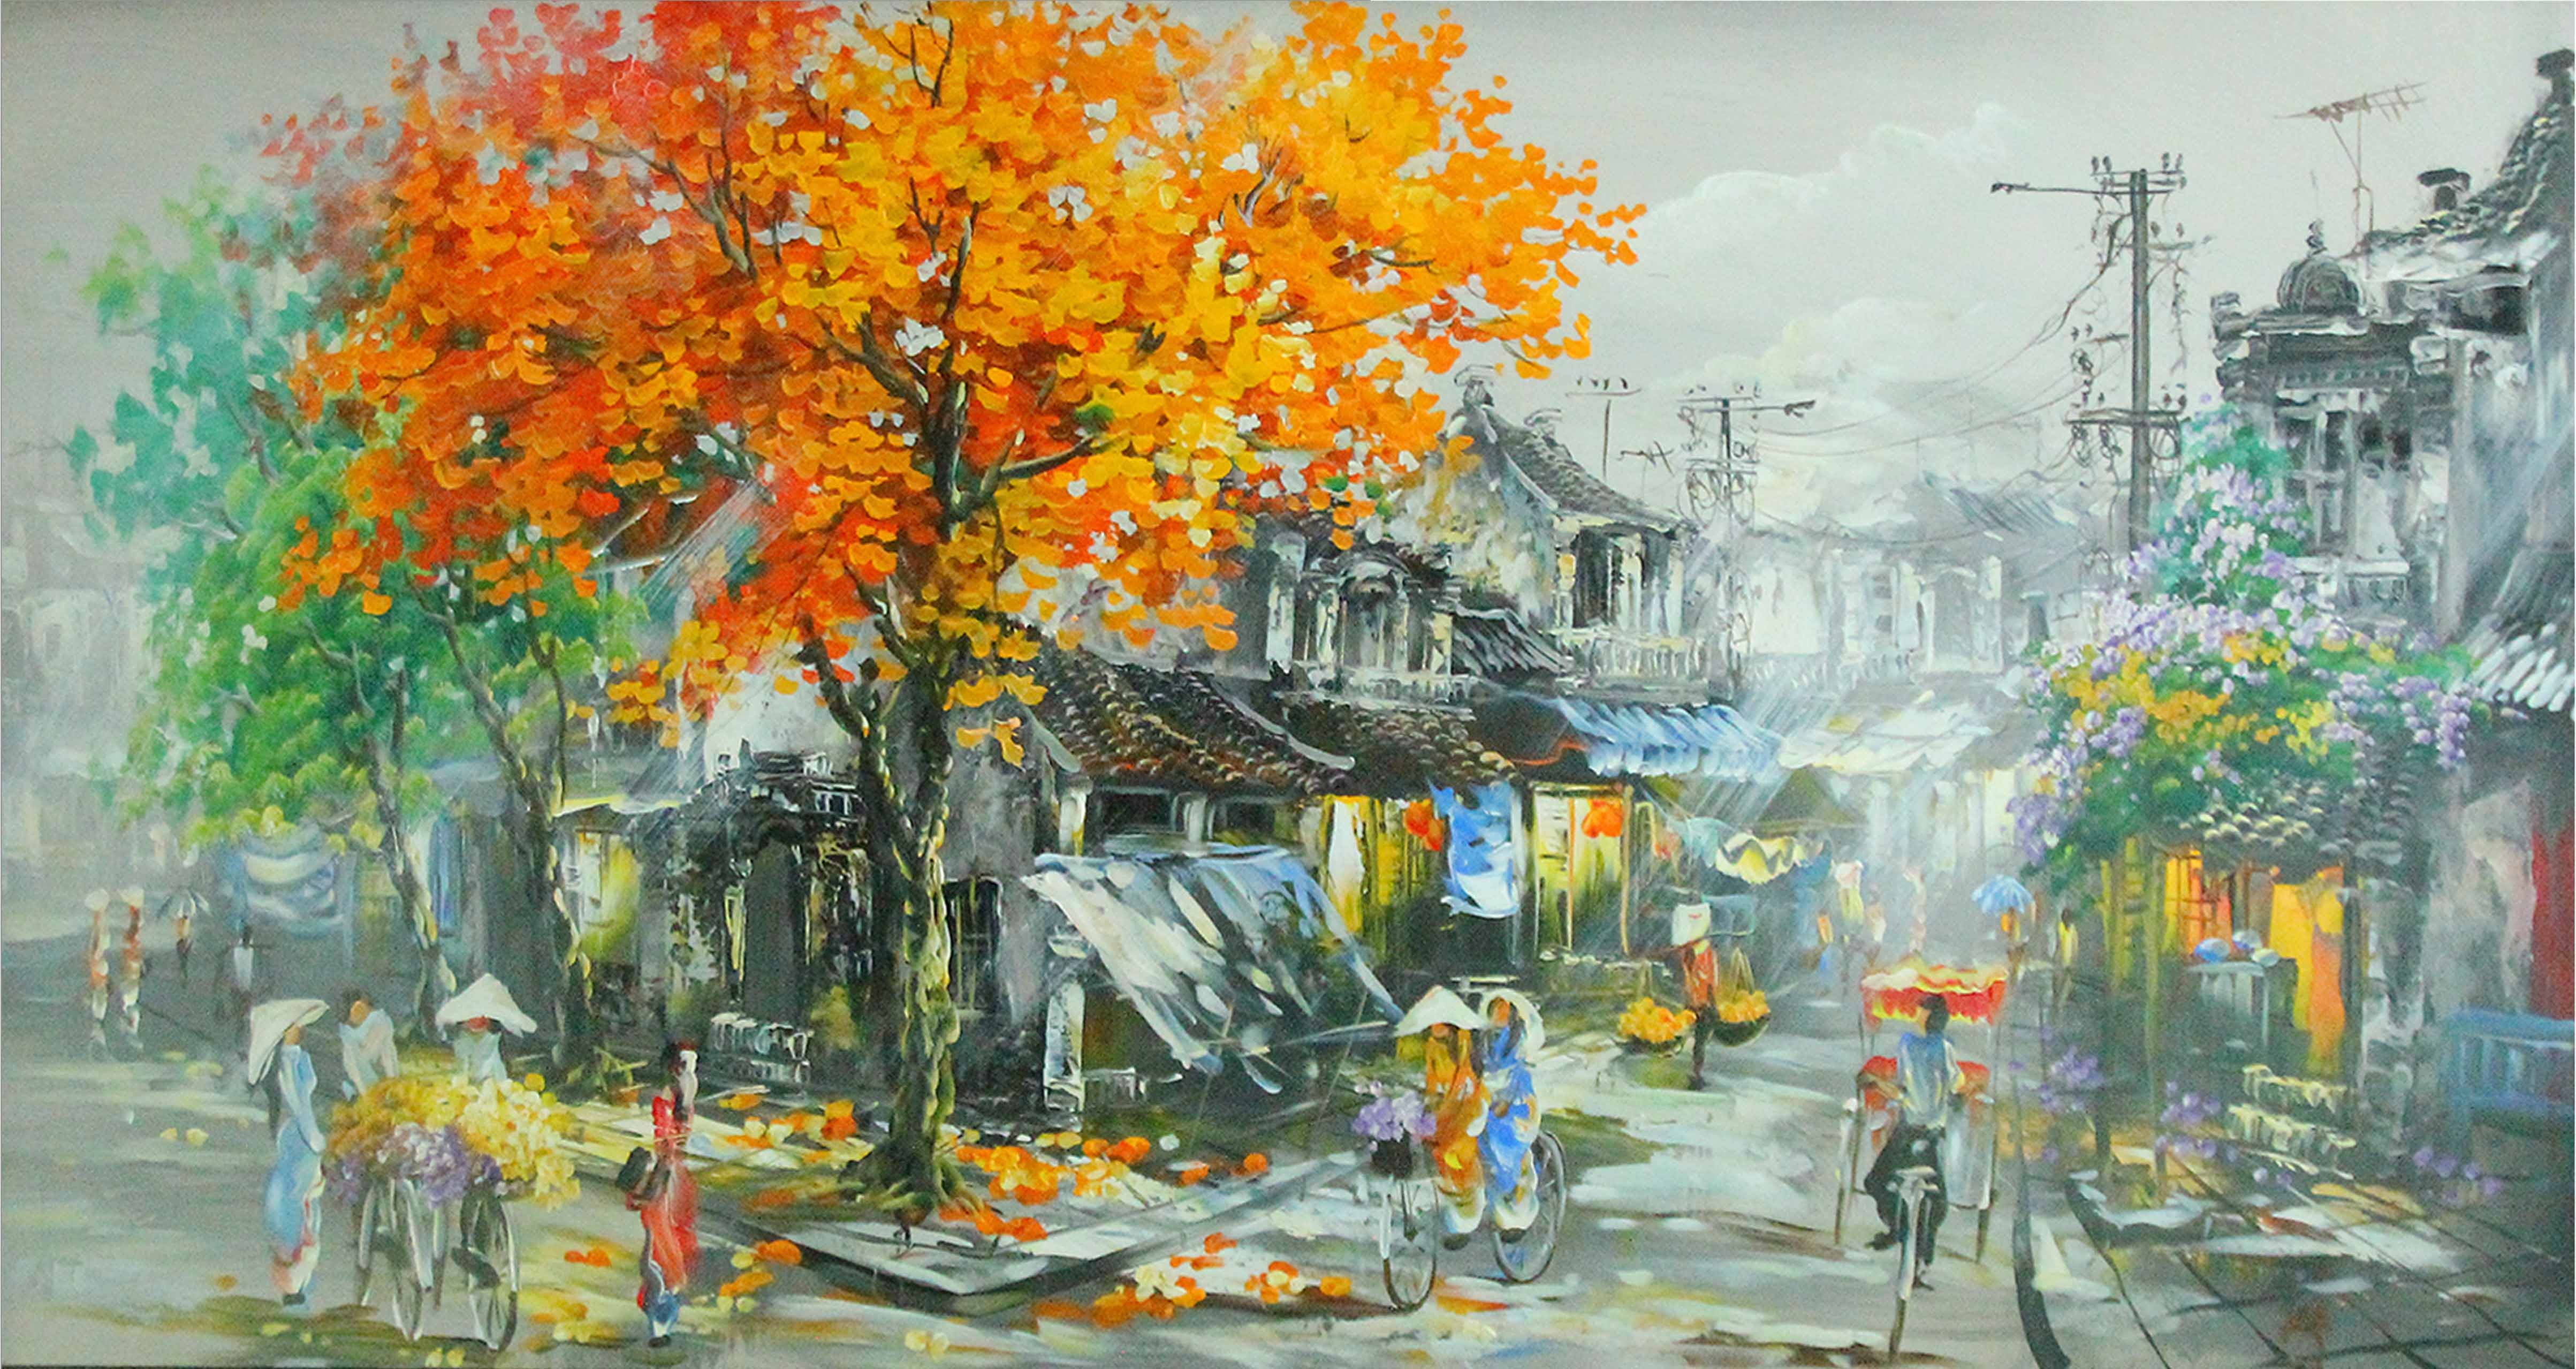 Oil painting of Old town - TSD24LHAR